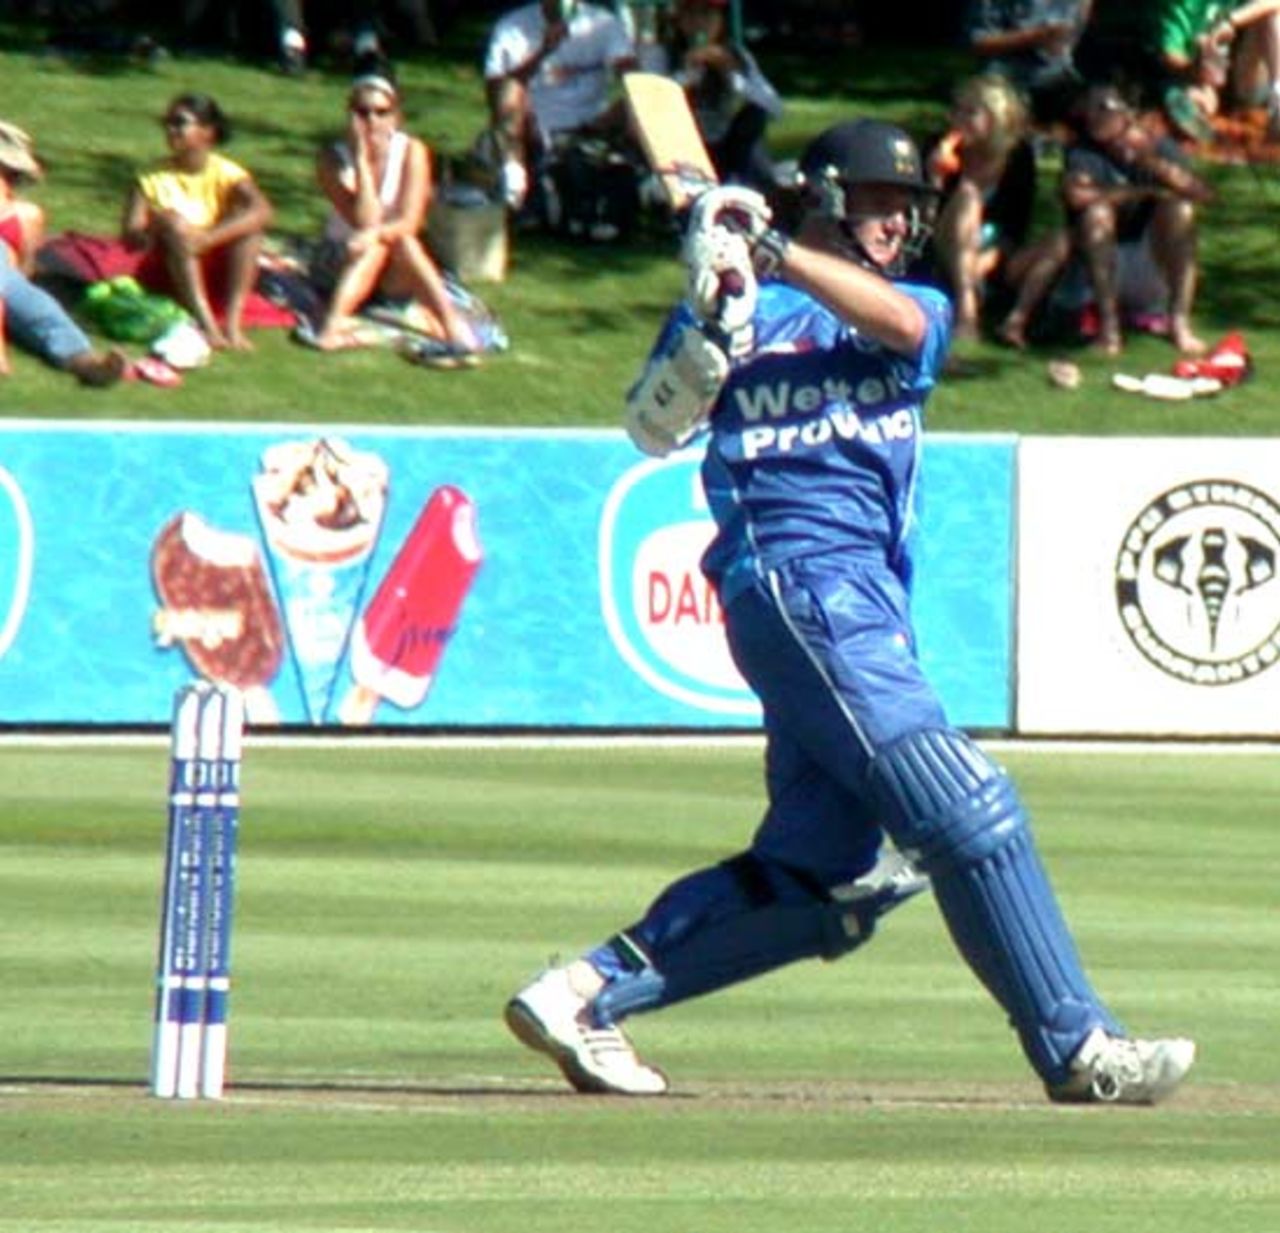 MOM Graeme Smith hooking against North West. WP defeated NW by 7 runs on Friday